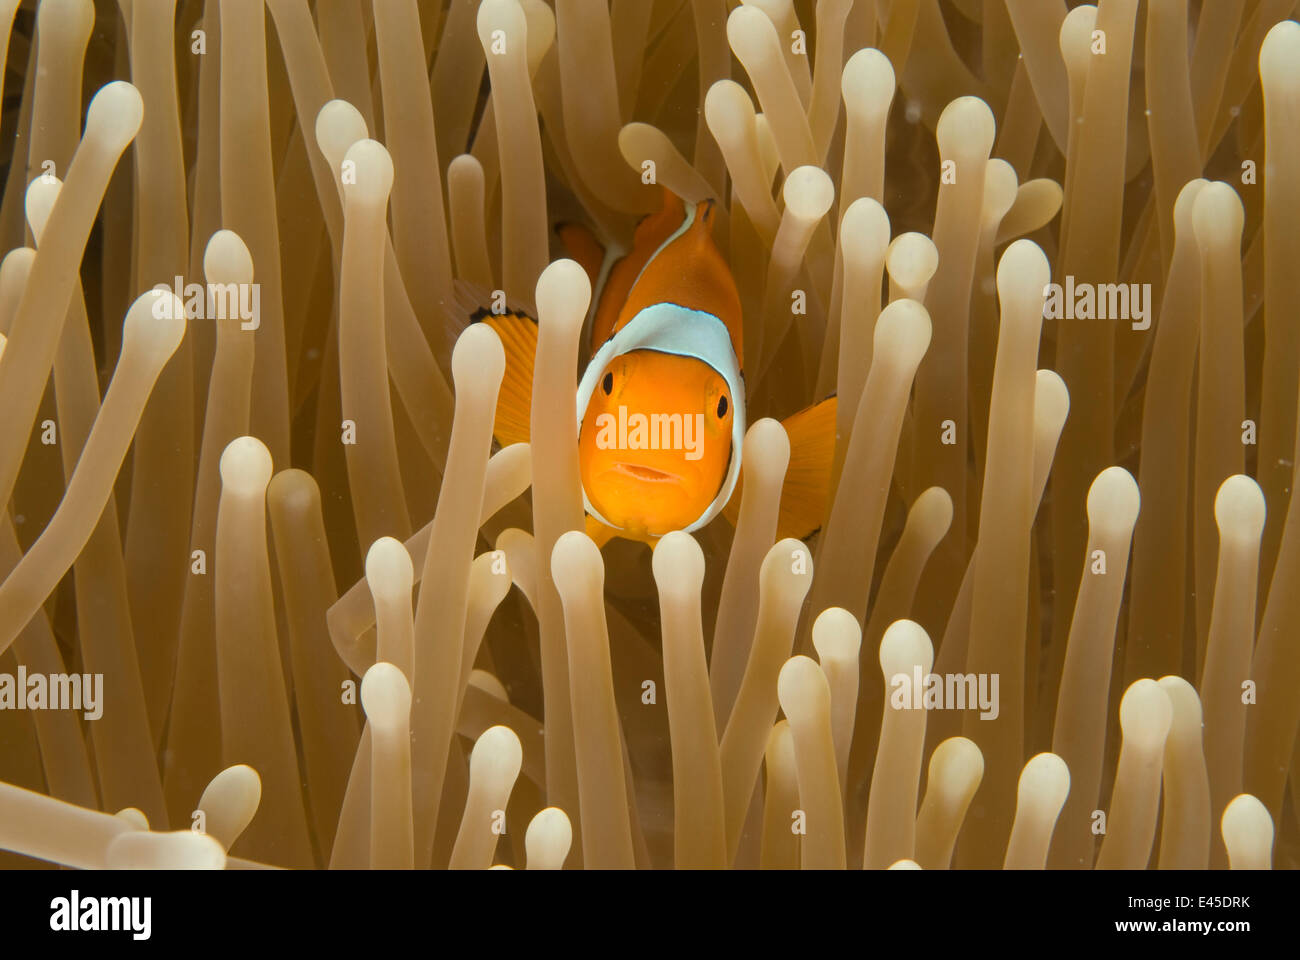 Clown anemonefish (Amphiprion percula) amongst anemone tentacles, Indo-pacific Stock Photo